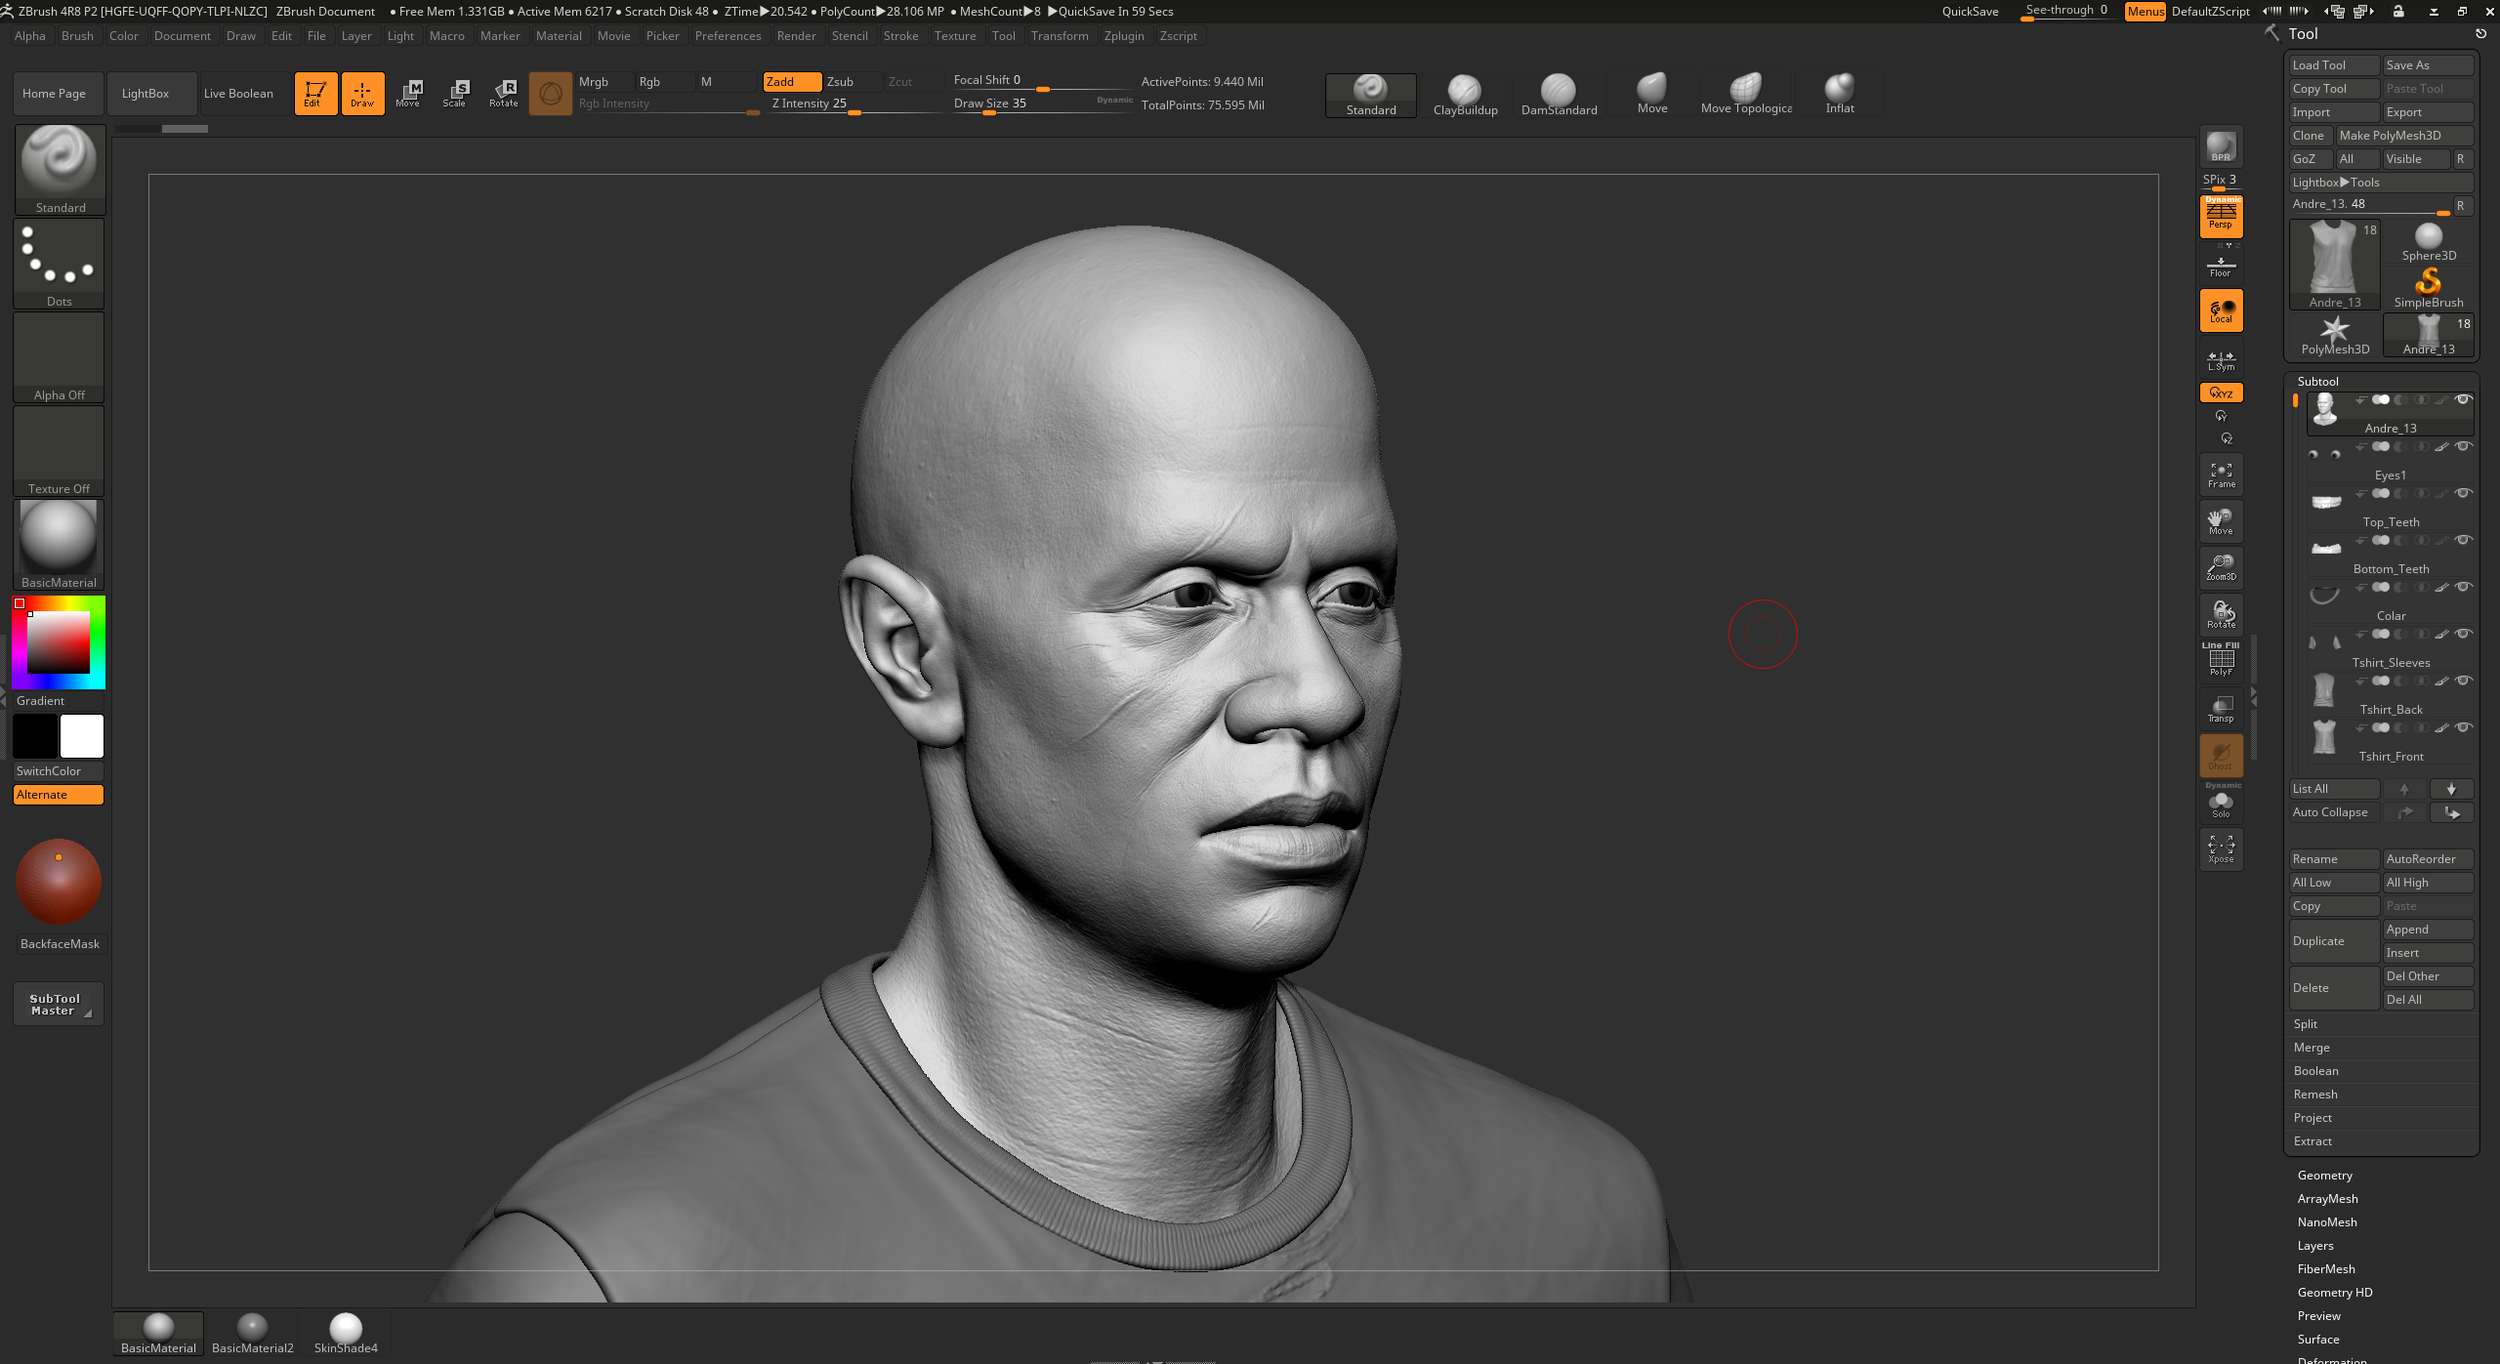 Andre_Zbrush_01.png